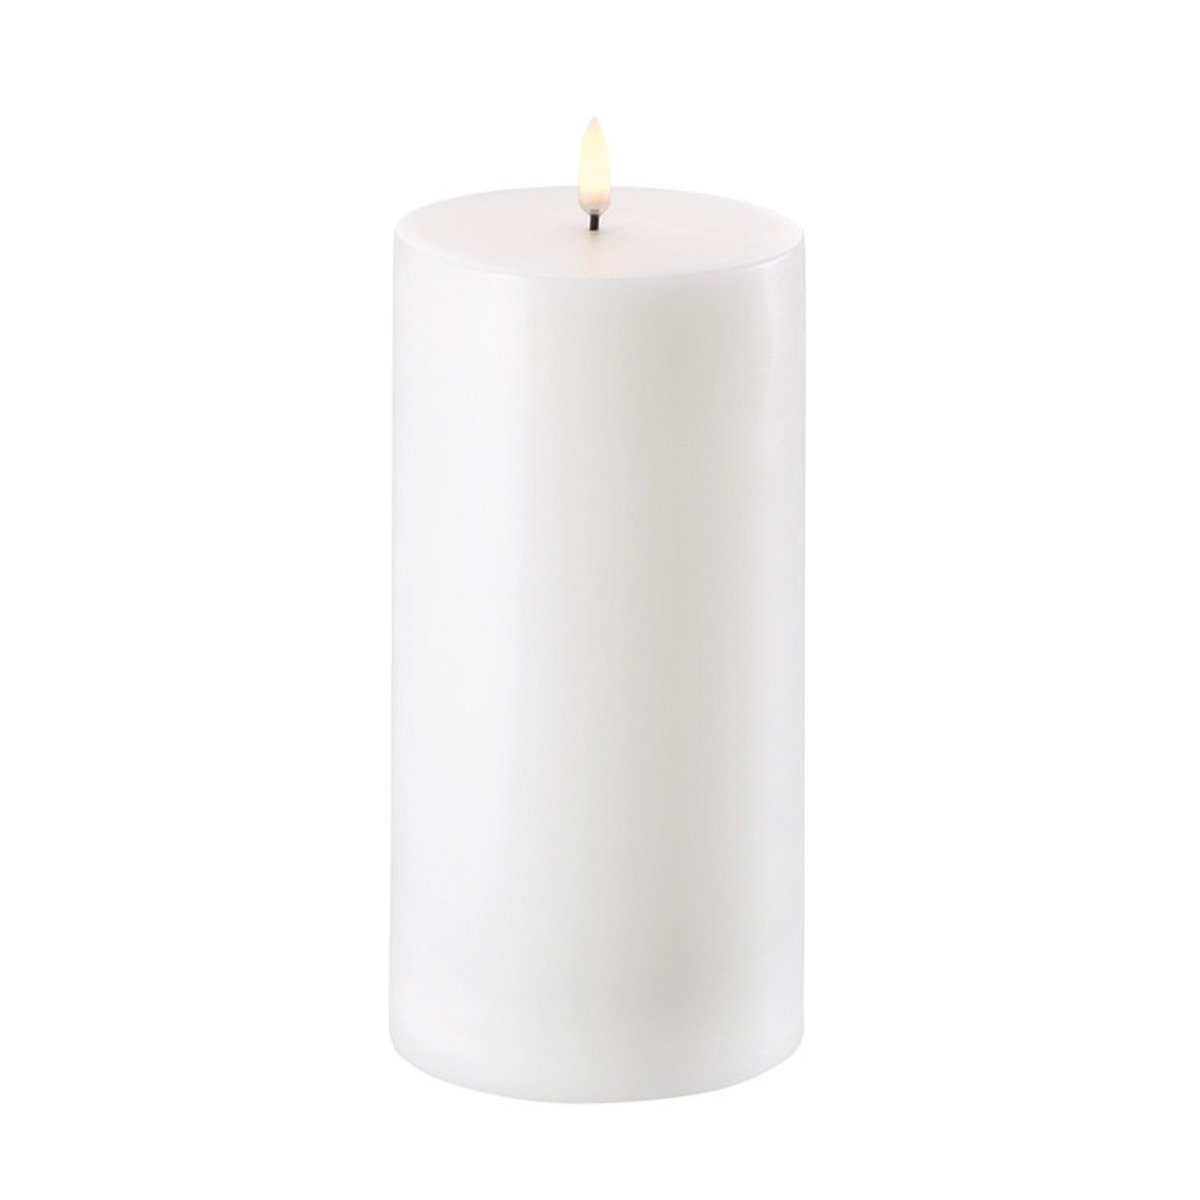 Lighthaus : How to Get the Most Out of Pillar Candles?